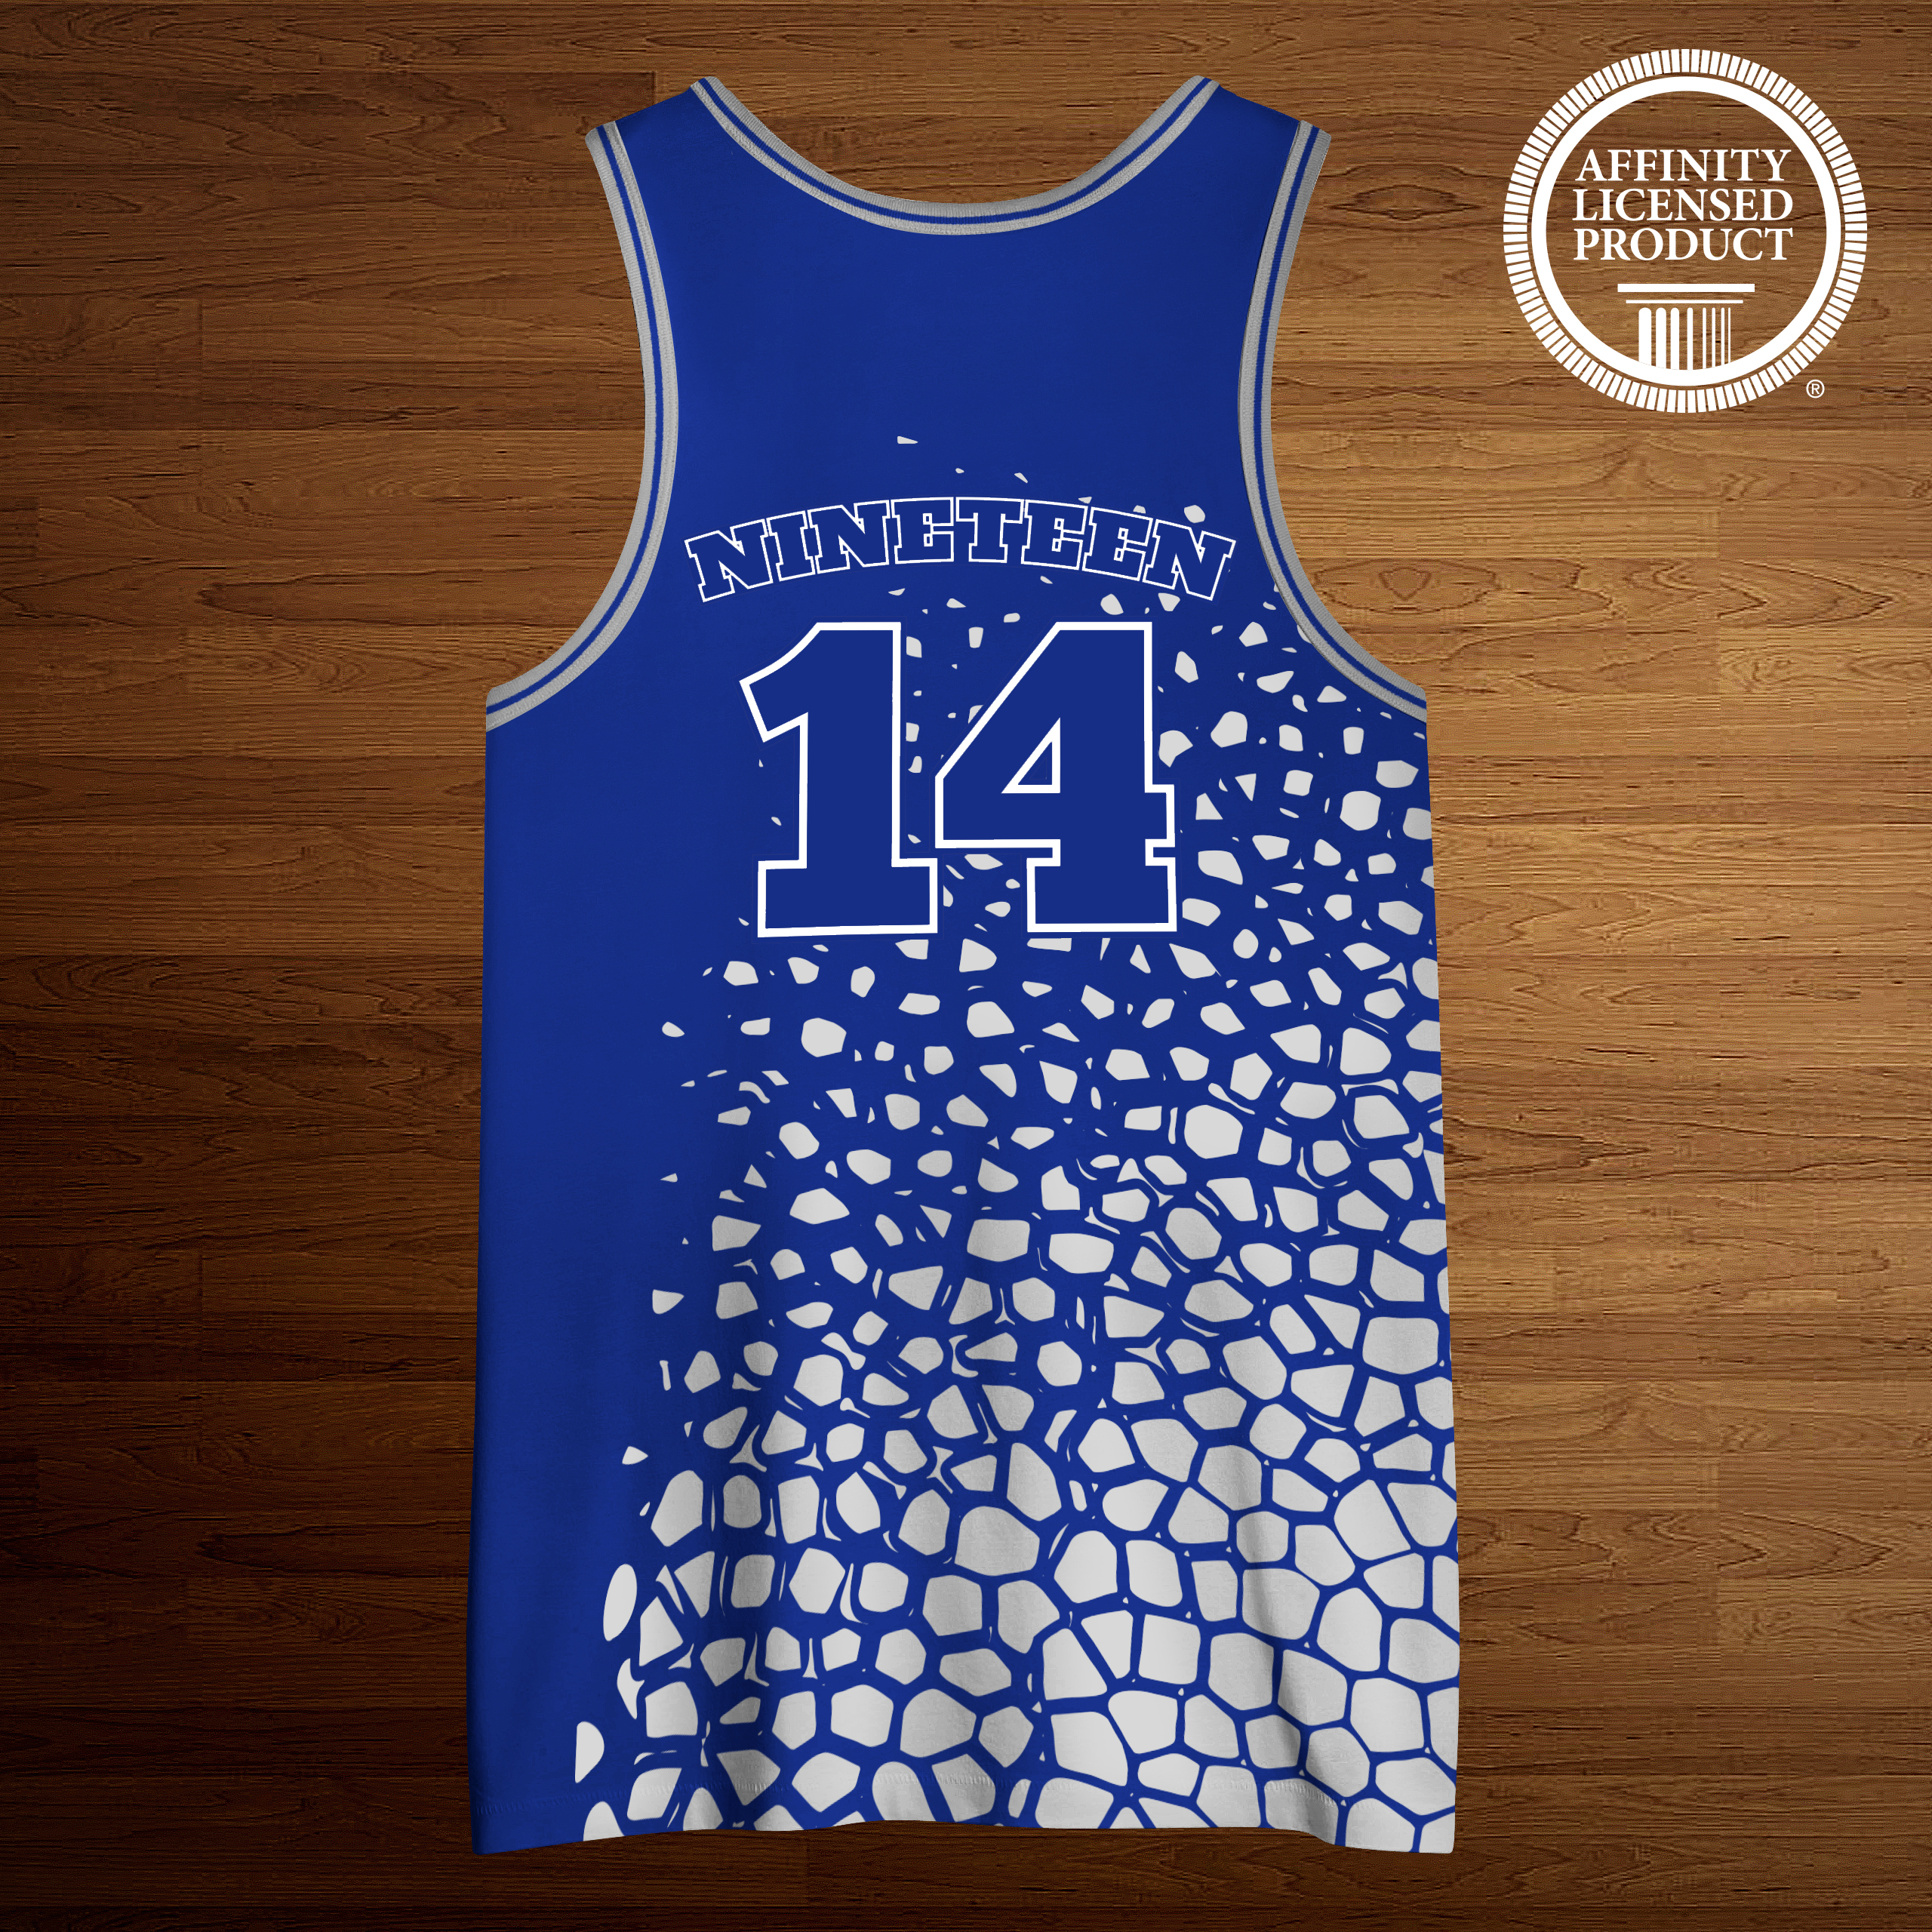 Sorority Fraternity Greek Letter Basketball Jersey – Campus Connection